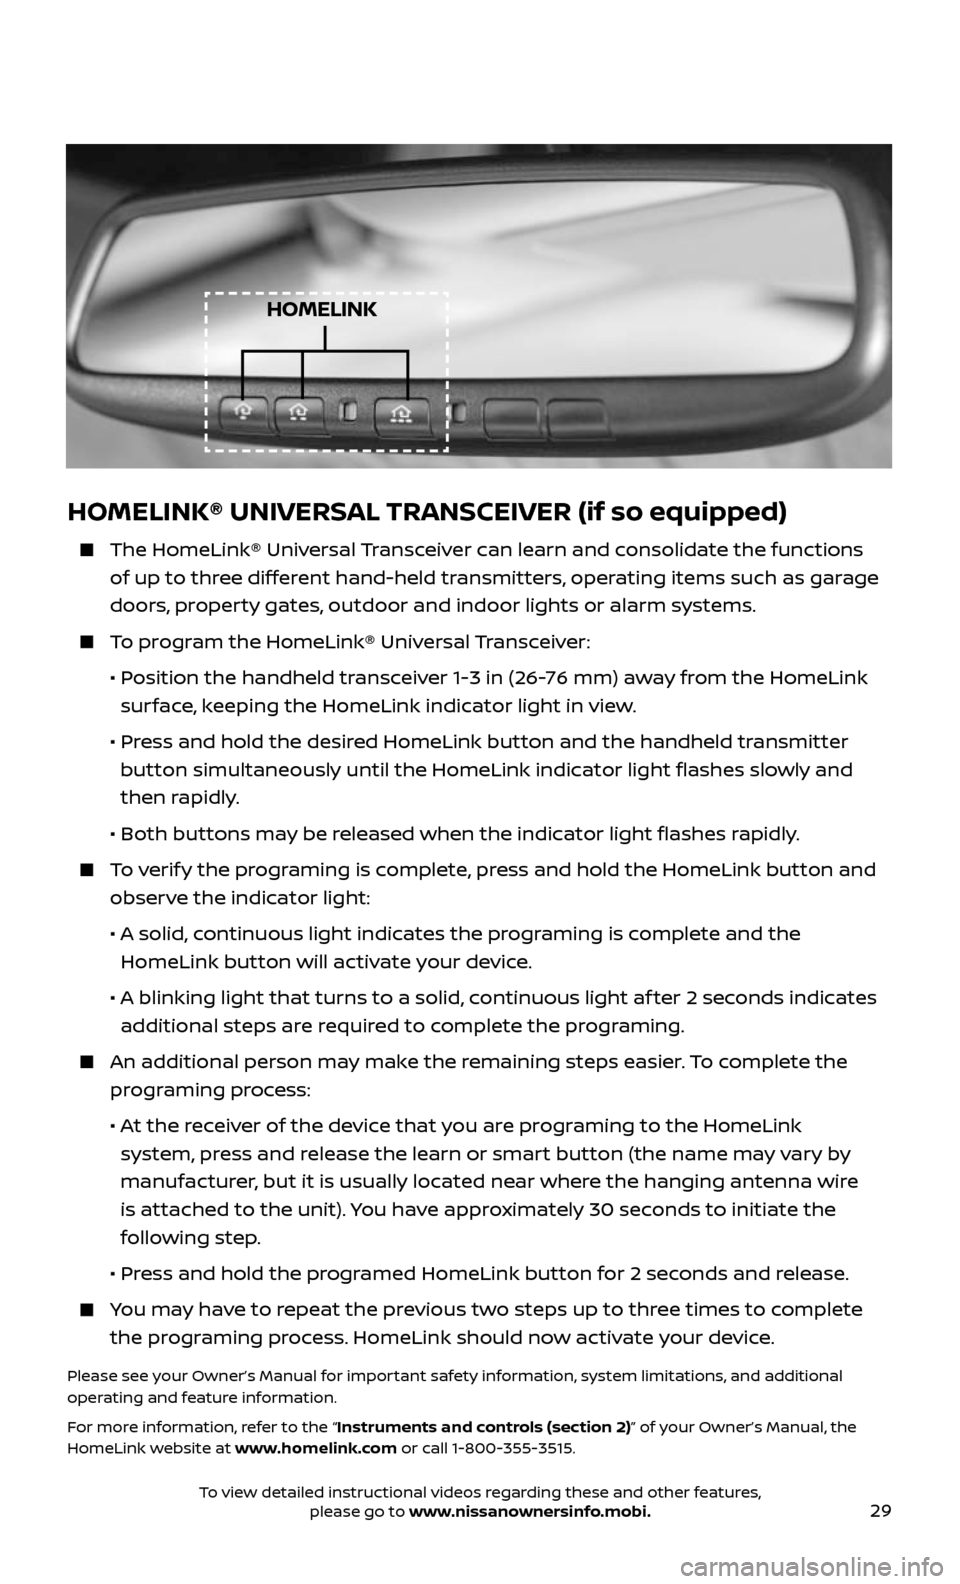 NISSAN ALTIMA 2017 L33 / 5.G Quick Reference Guide 29
HOMELINK
HOMELINK® UNIVERSAL TRANSCEIVER (if so equipped) 
    The HomeLink® Universal Transceiver can learn and consolidate the functions 
of up to three different hand-held transmitters, operat